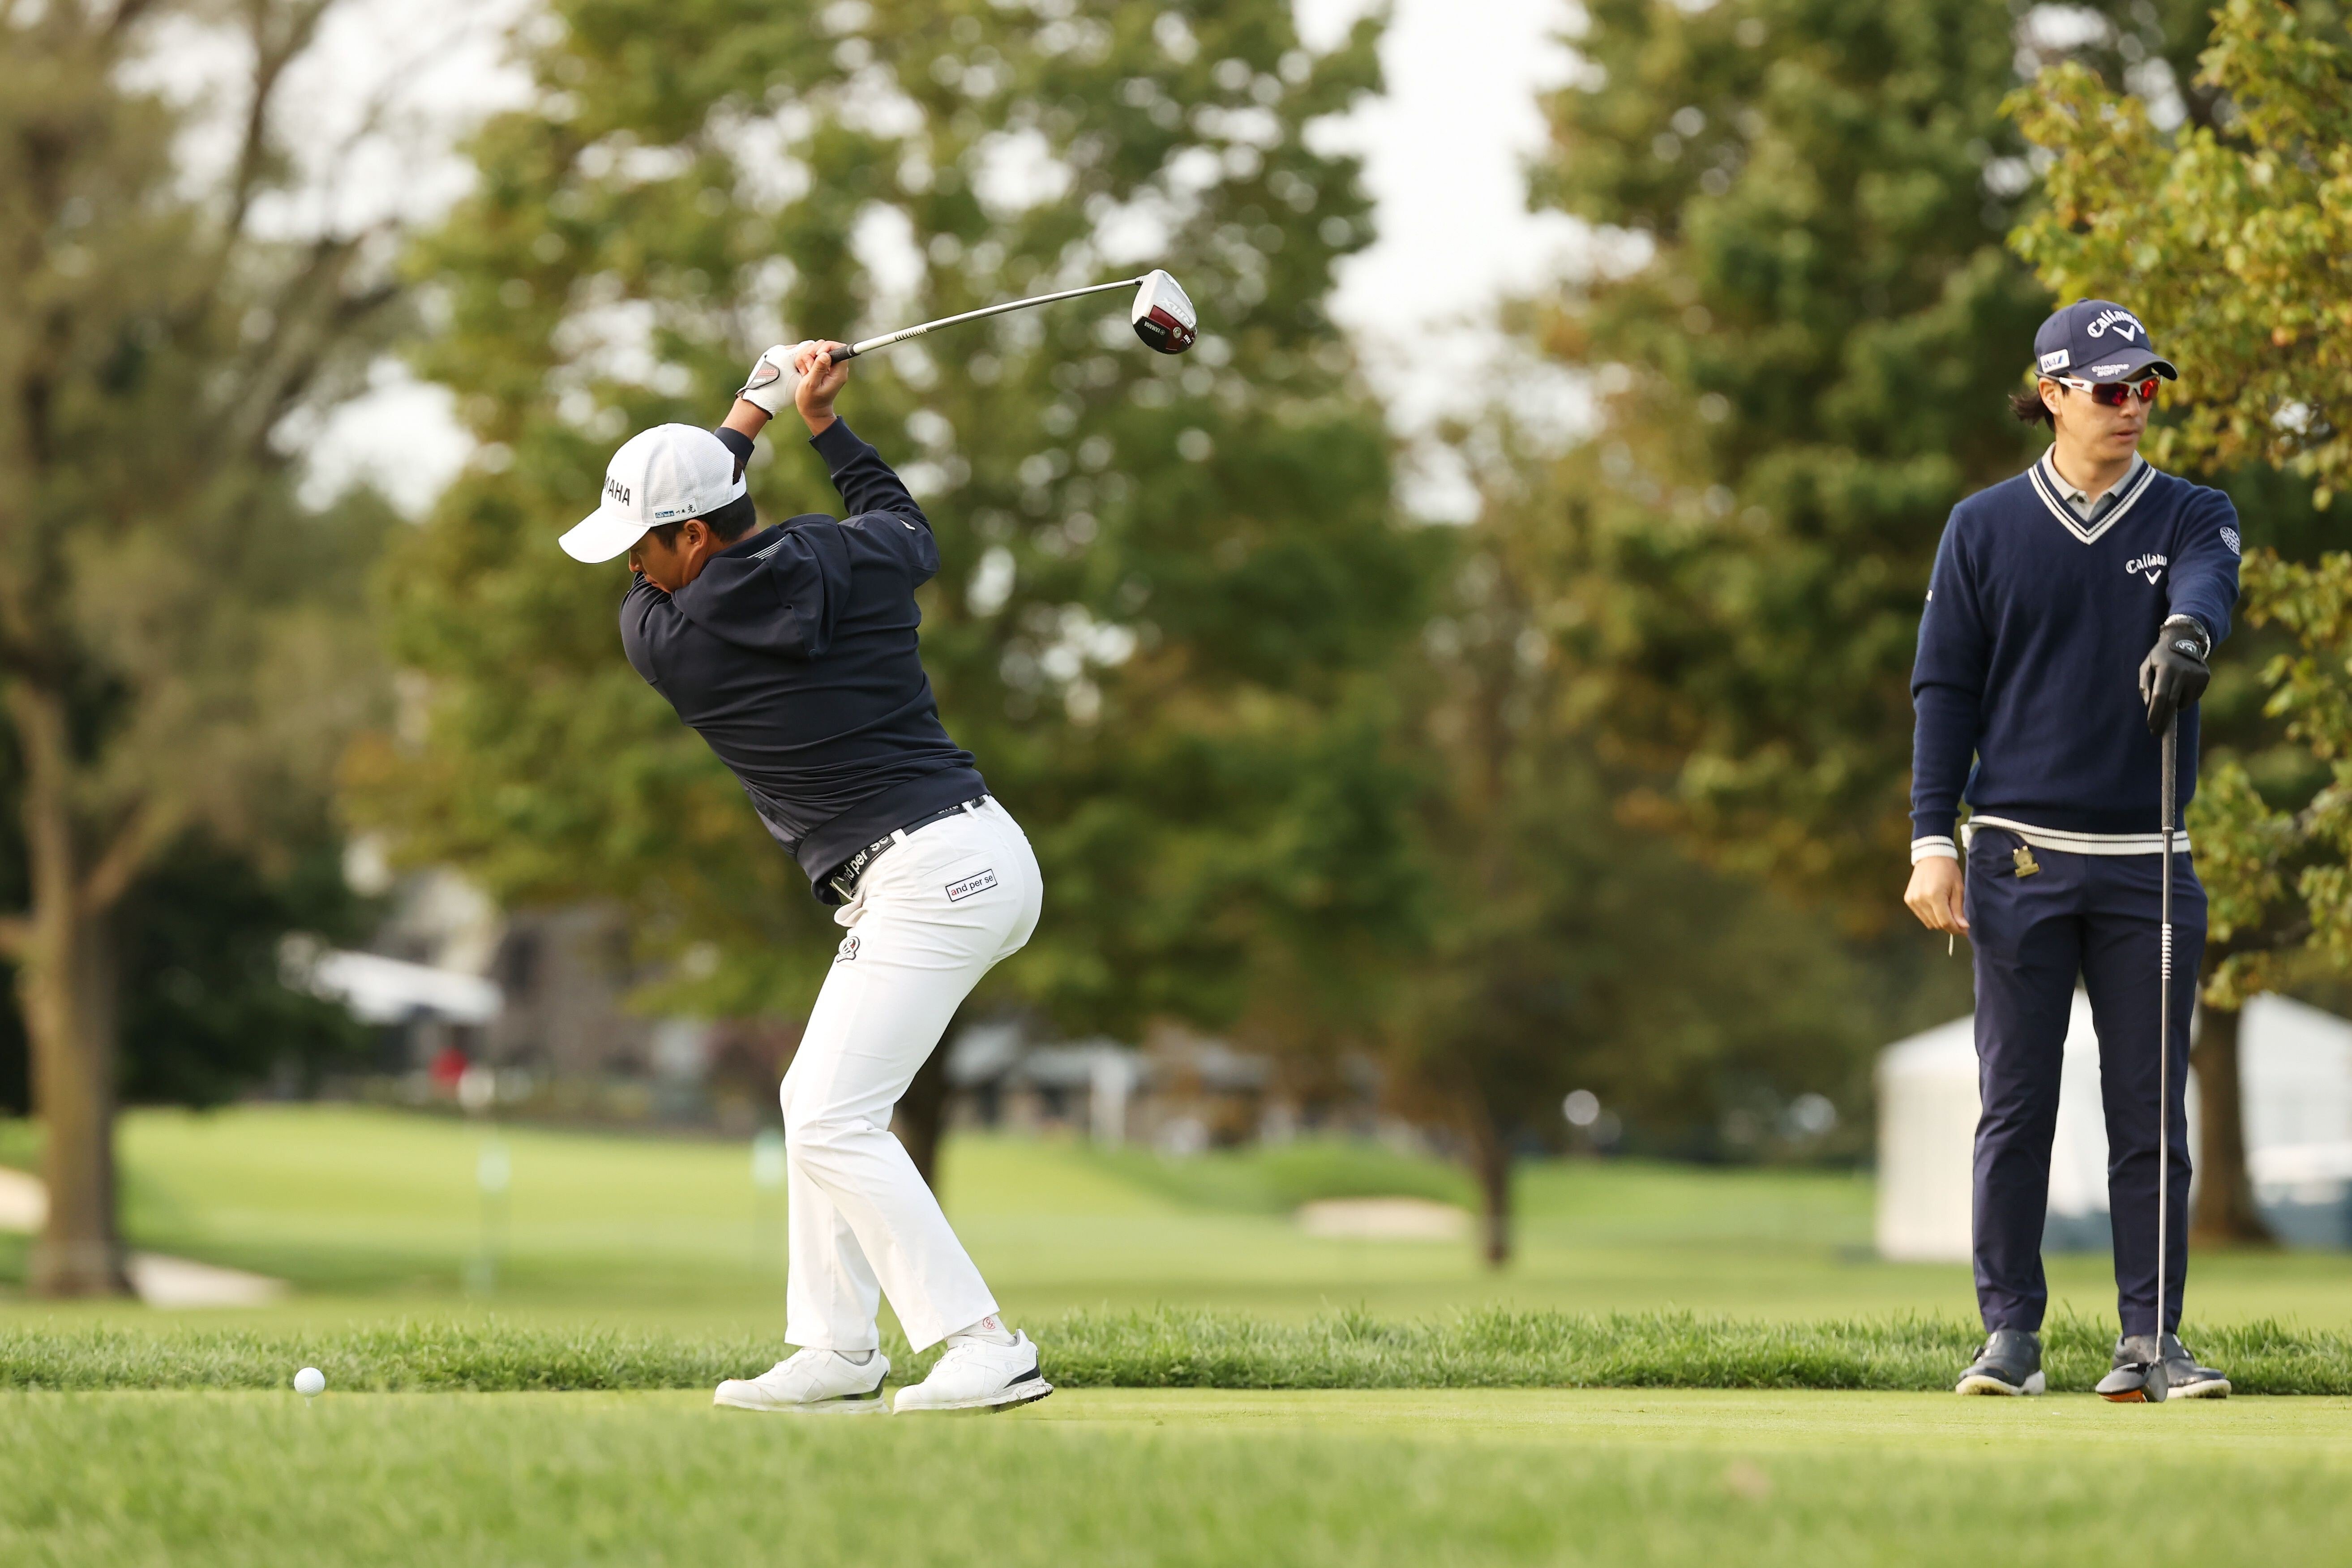 Shugo Imahira of Japan tees off on a benign day at Winged Foot in the 120th US Open. Photo: AFP